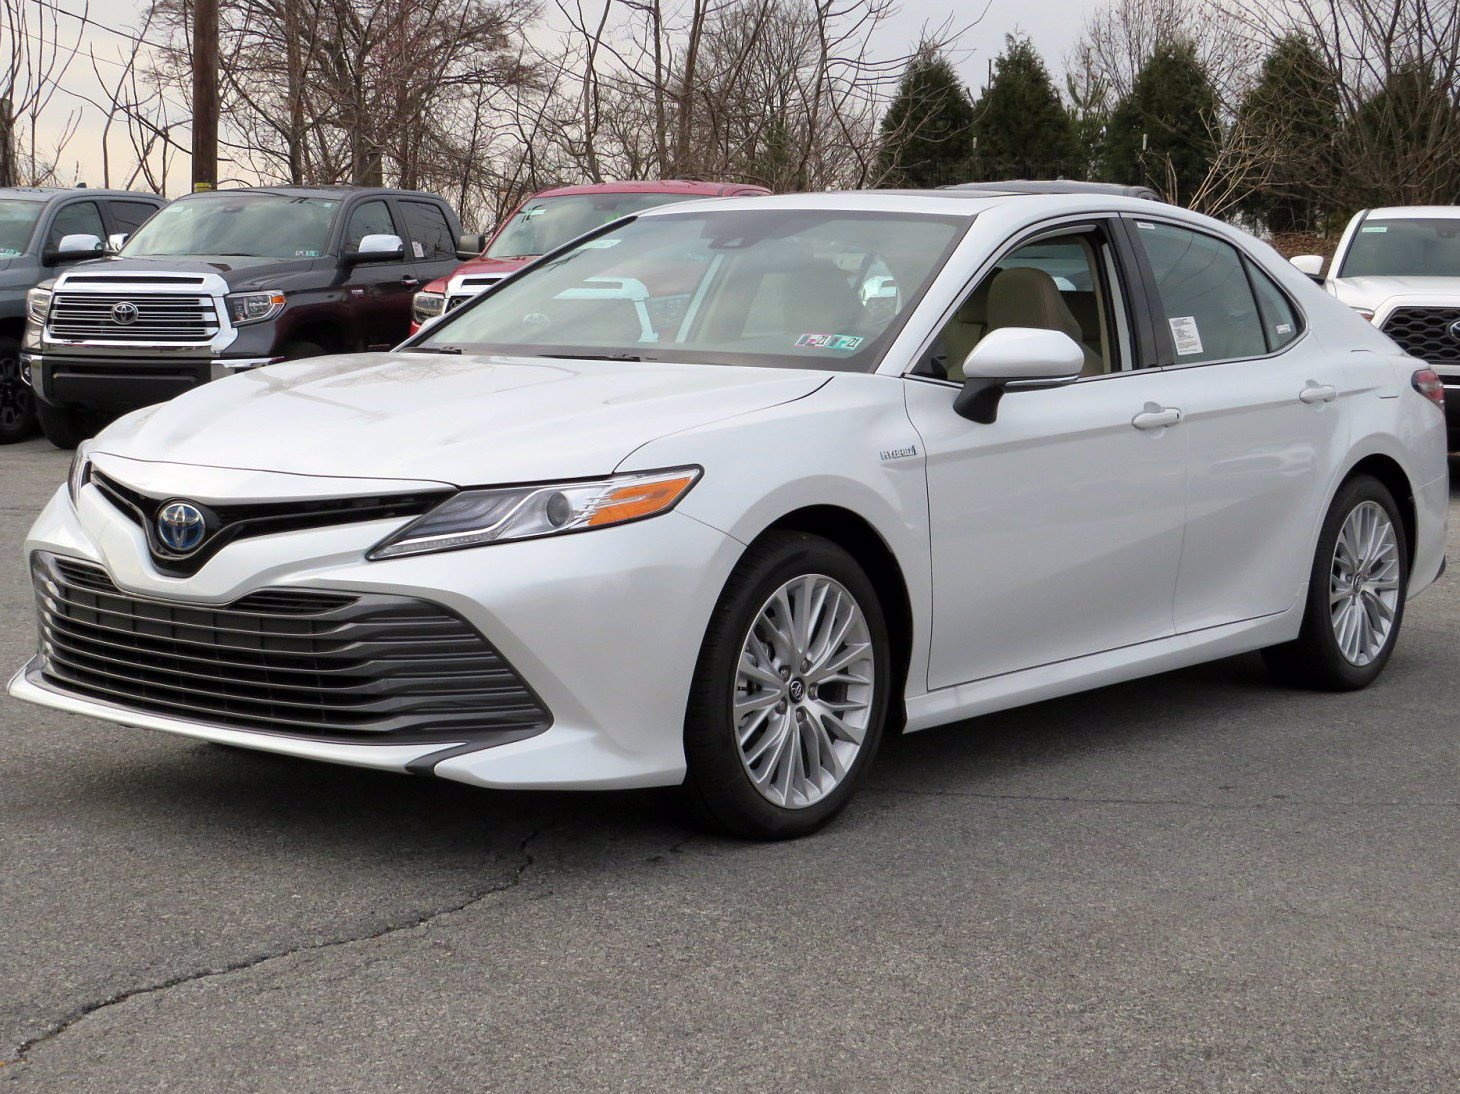 New 2020 Toyota Camry Hybrid XLE 4dr Car in Sinking Spring #202043 ...
